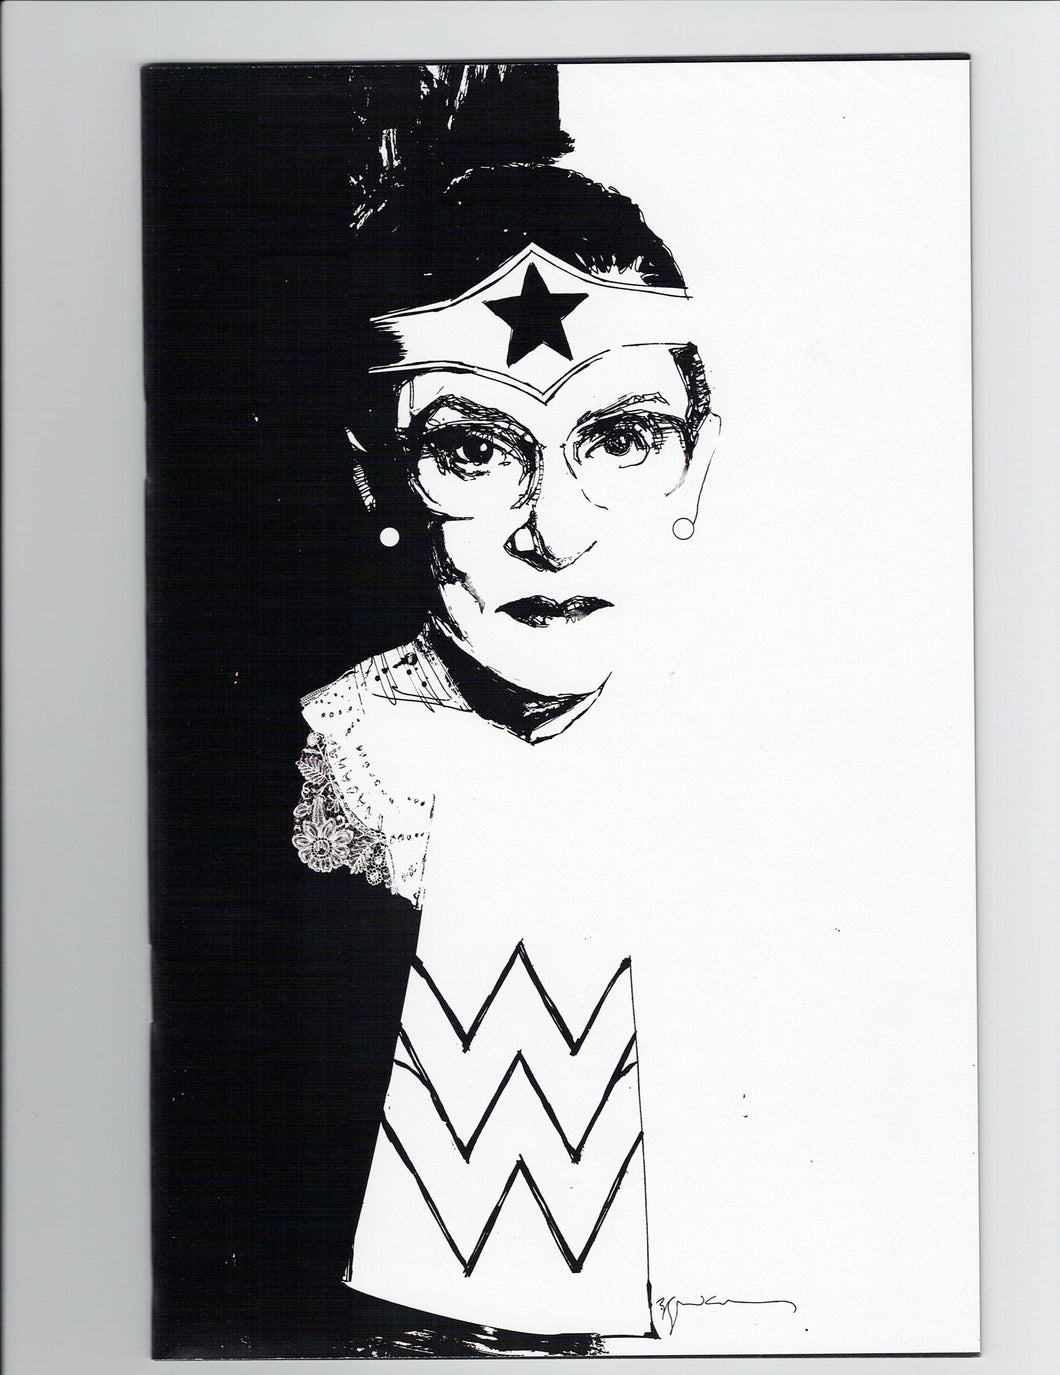 I Dissent - Dissents, Opinions, and Artwork of Ruth Bader Ginsburg- Virgin